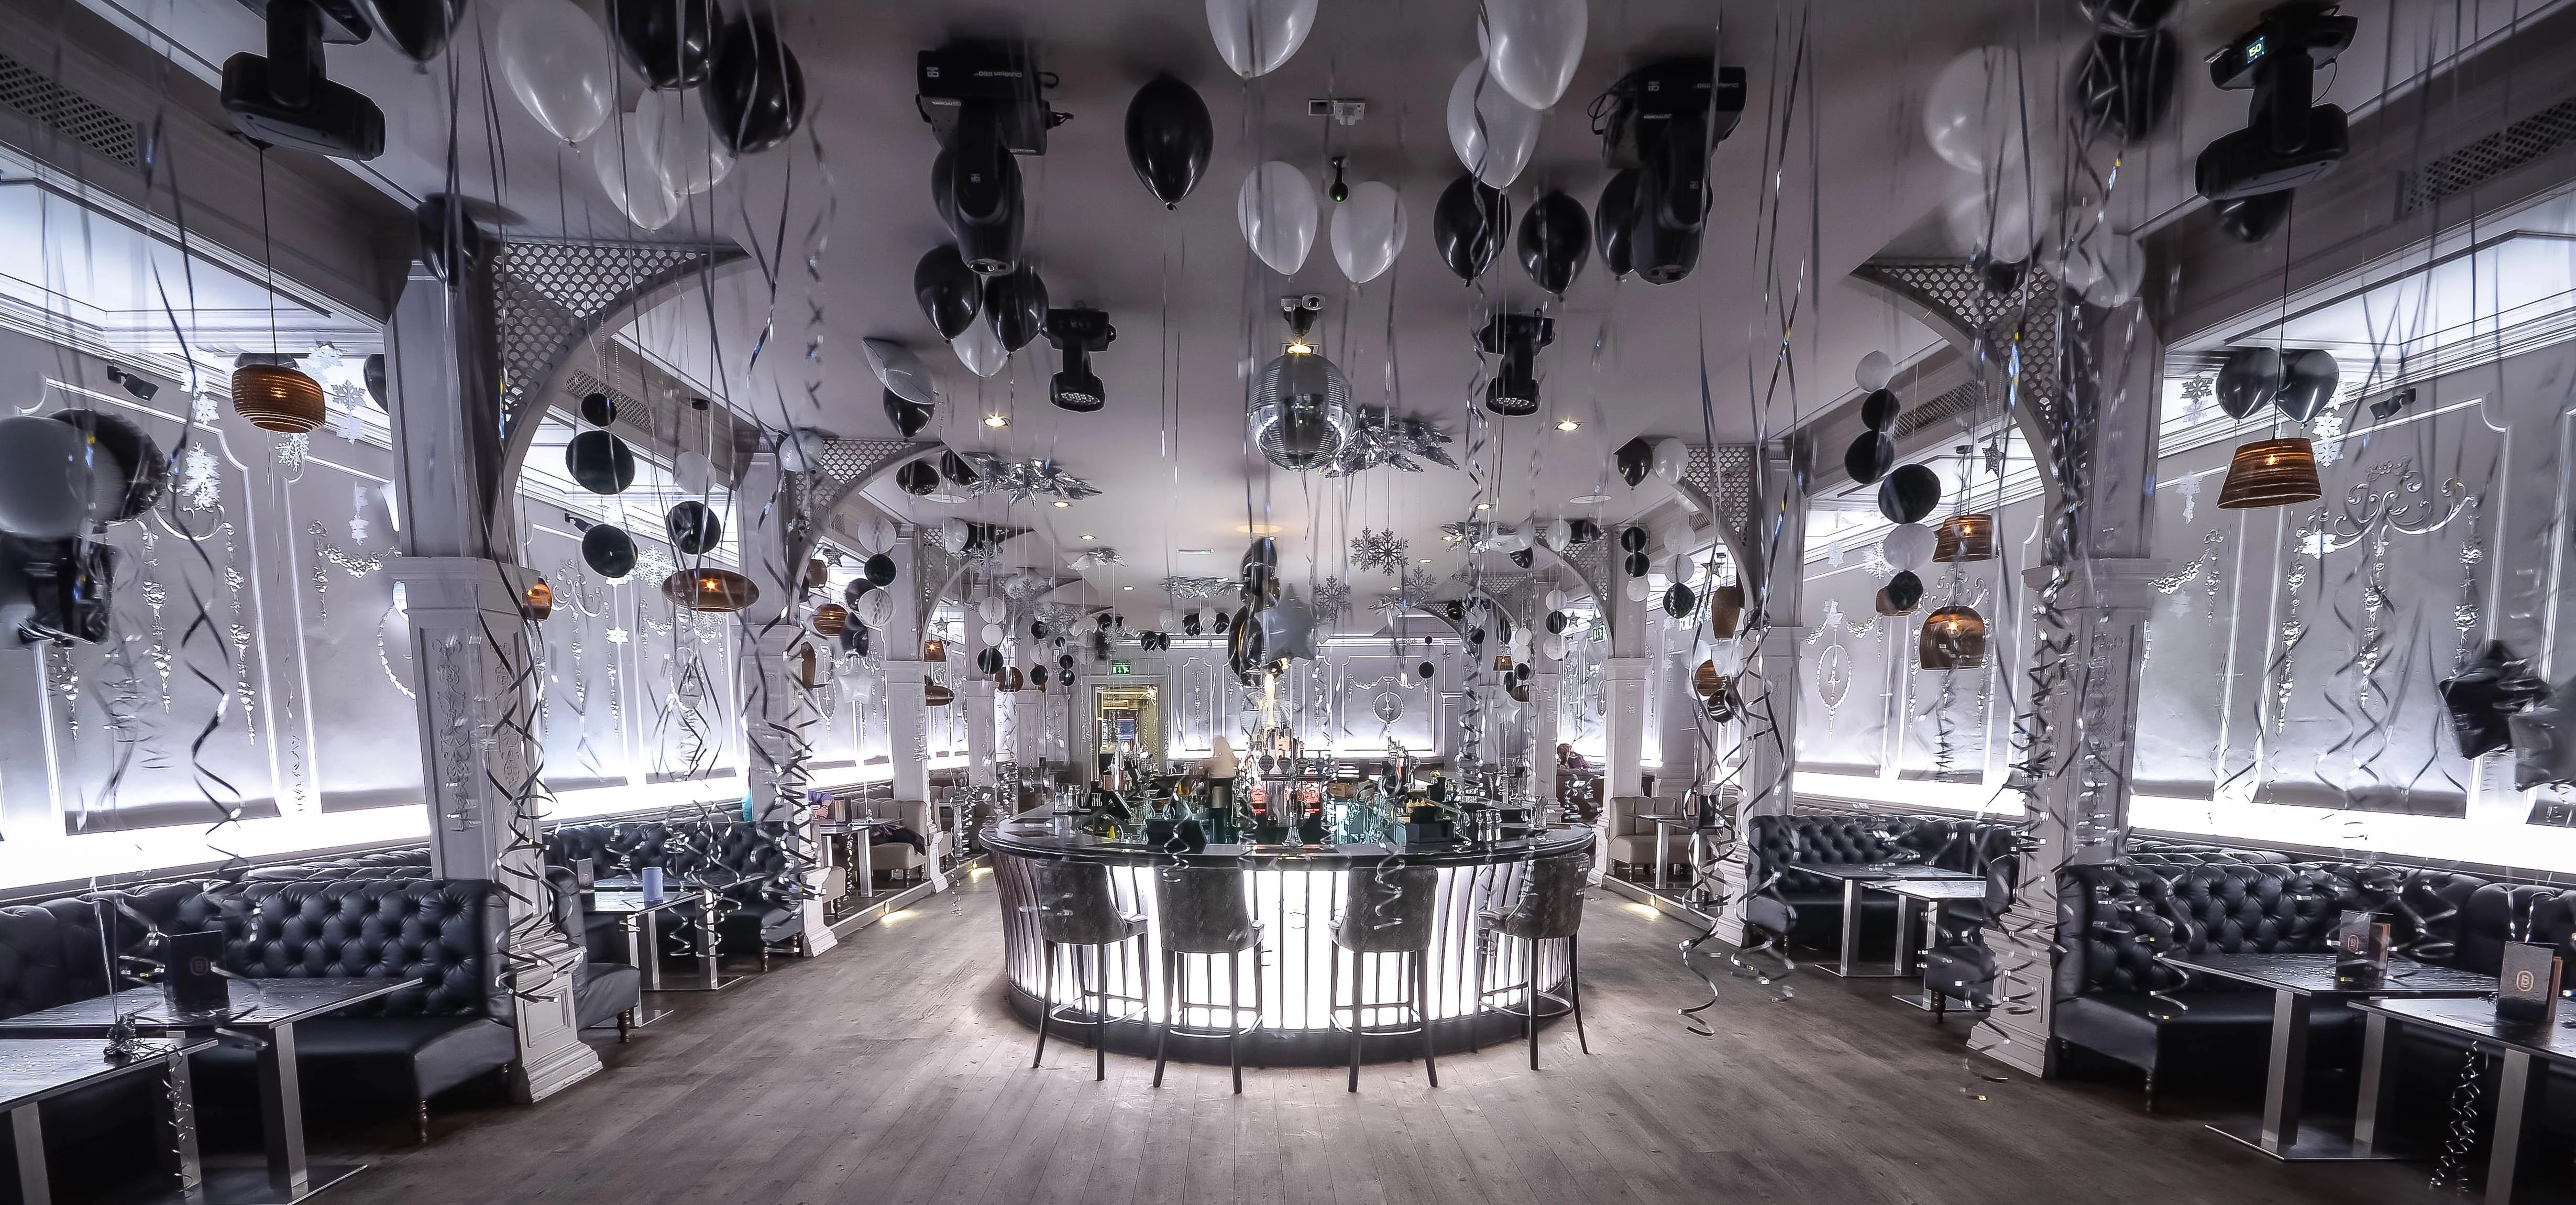 Bonbar is hosting a black and white party on New Year's Eve 